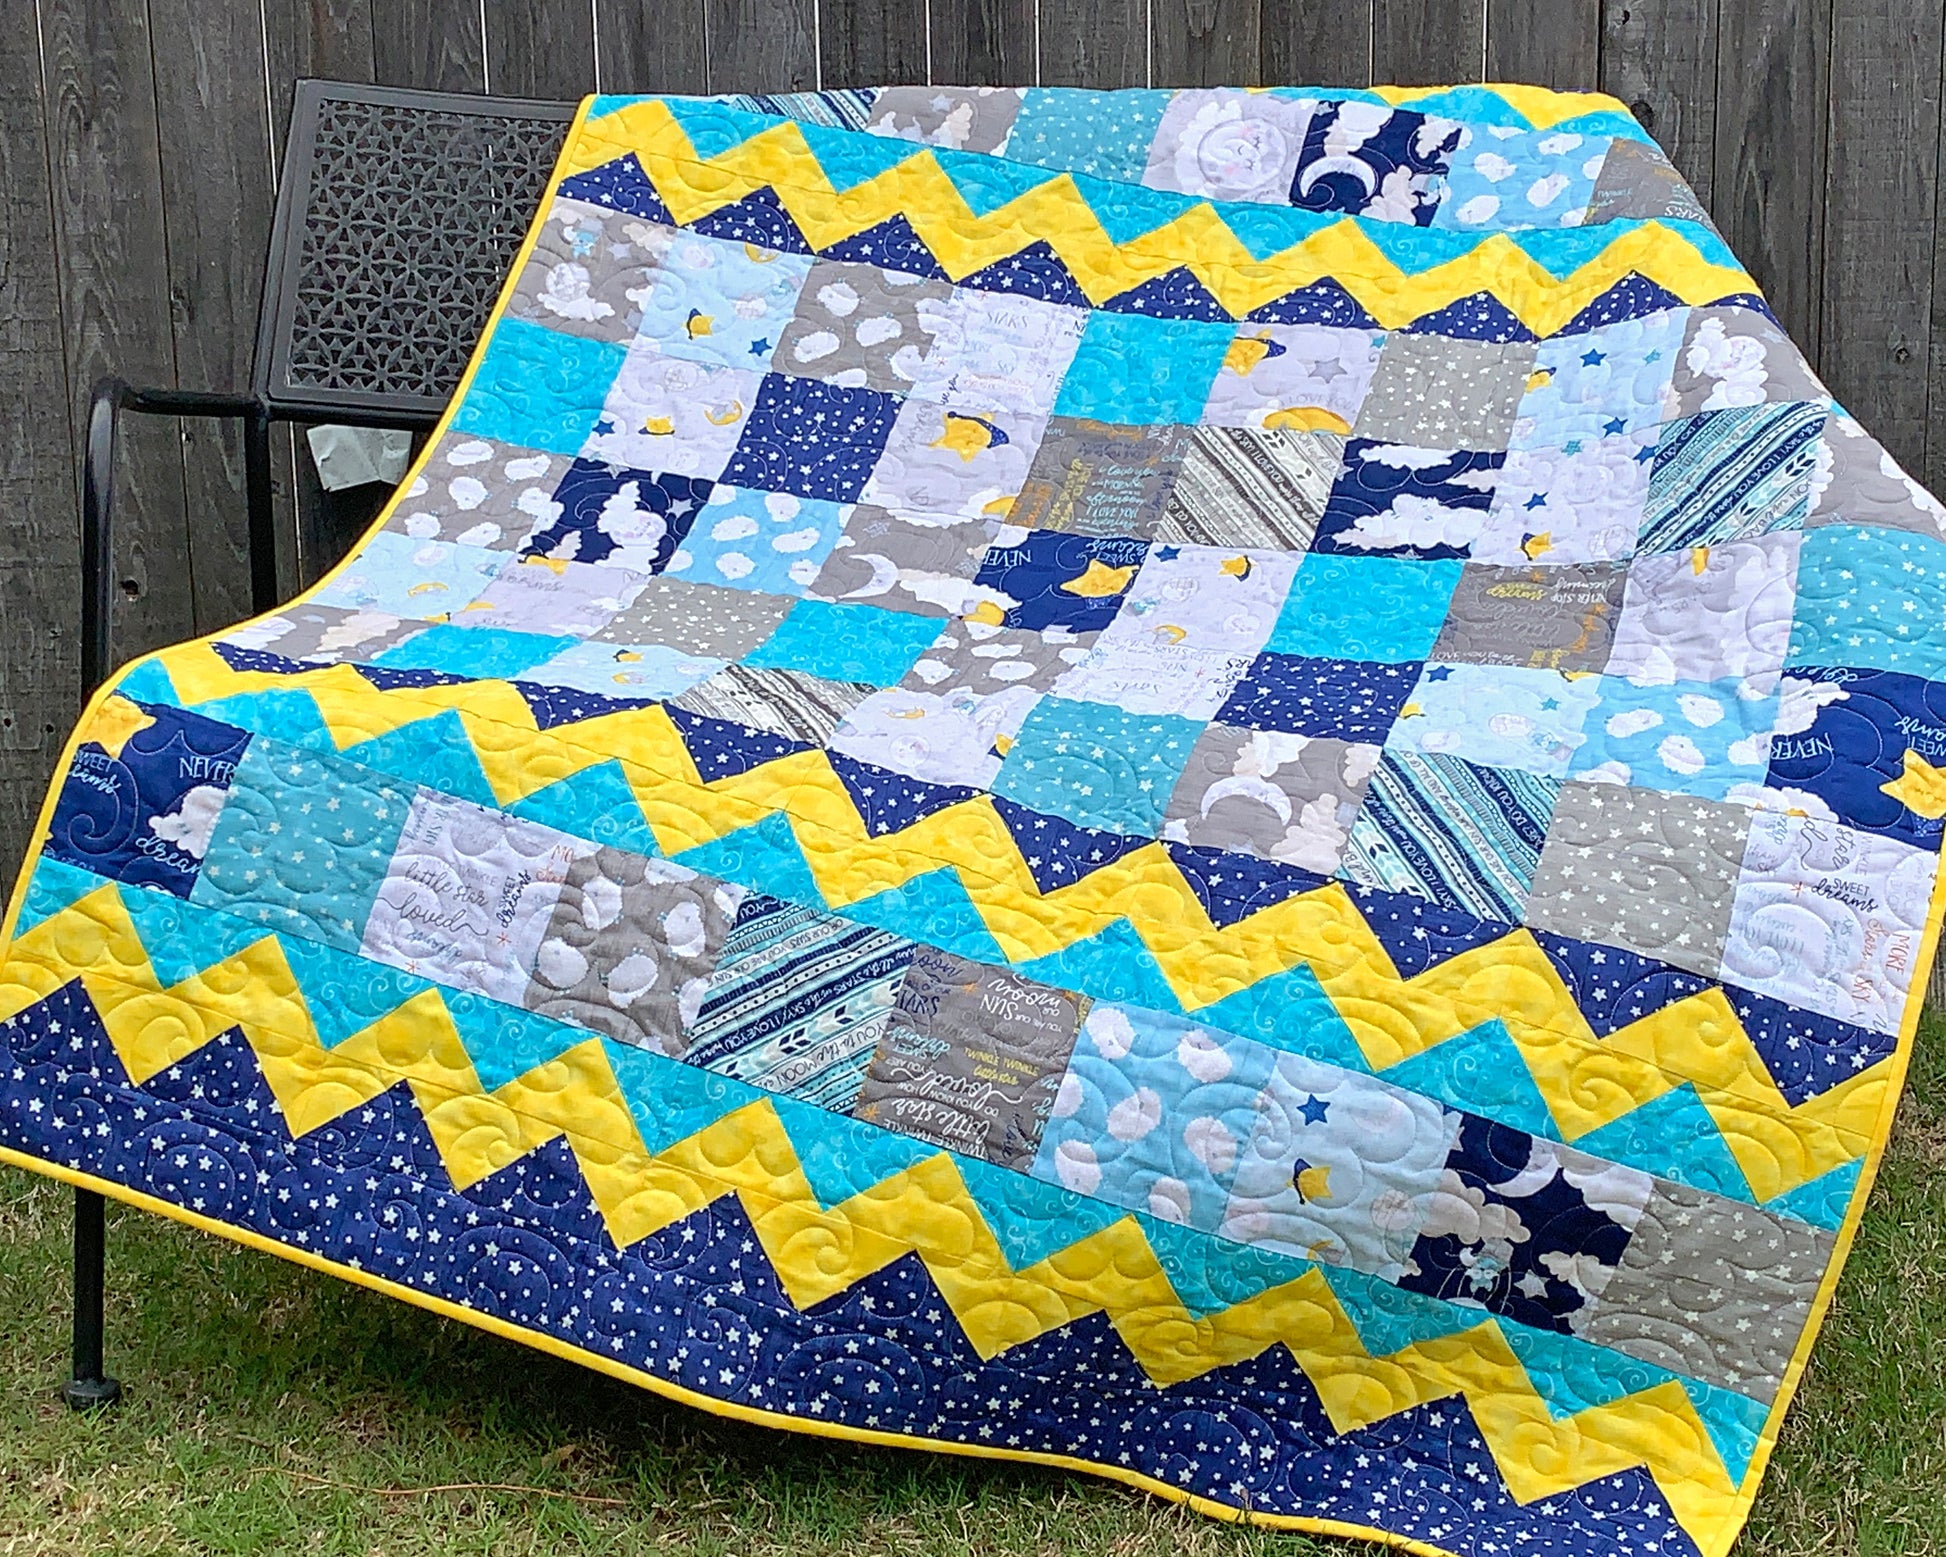 Baby Blocks charm square baby quilt pattern with yellow top and bottom zig-zag rows that look like rick-rack with rows of patchwork squares in between. Quilt is trimmed in blue and yellow and is shown displayed on a bench.